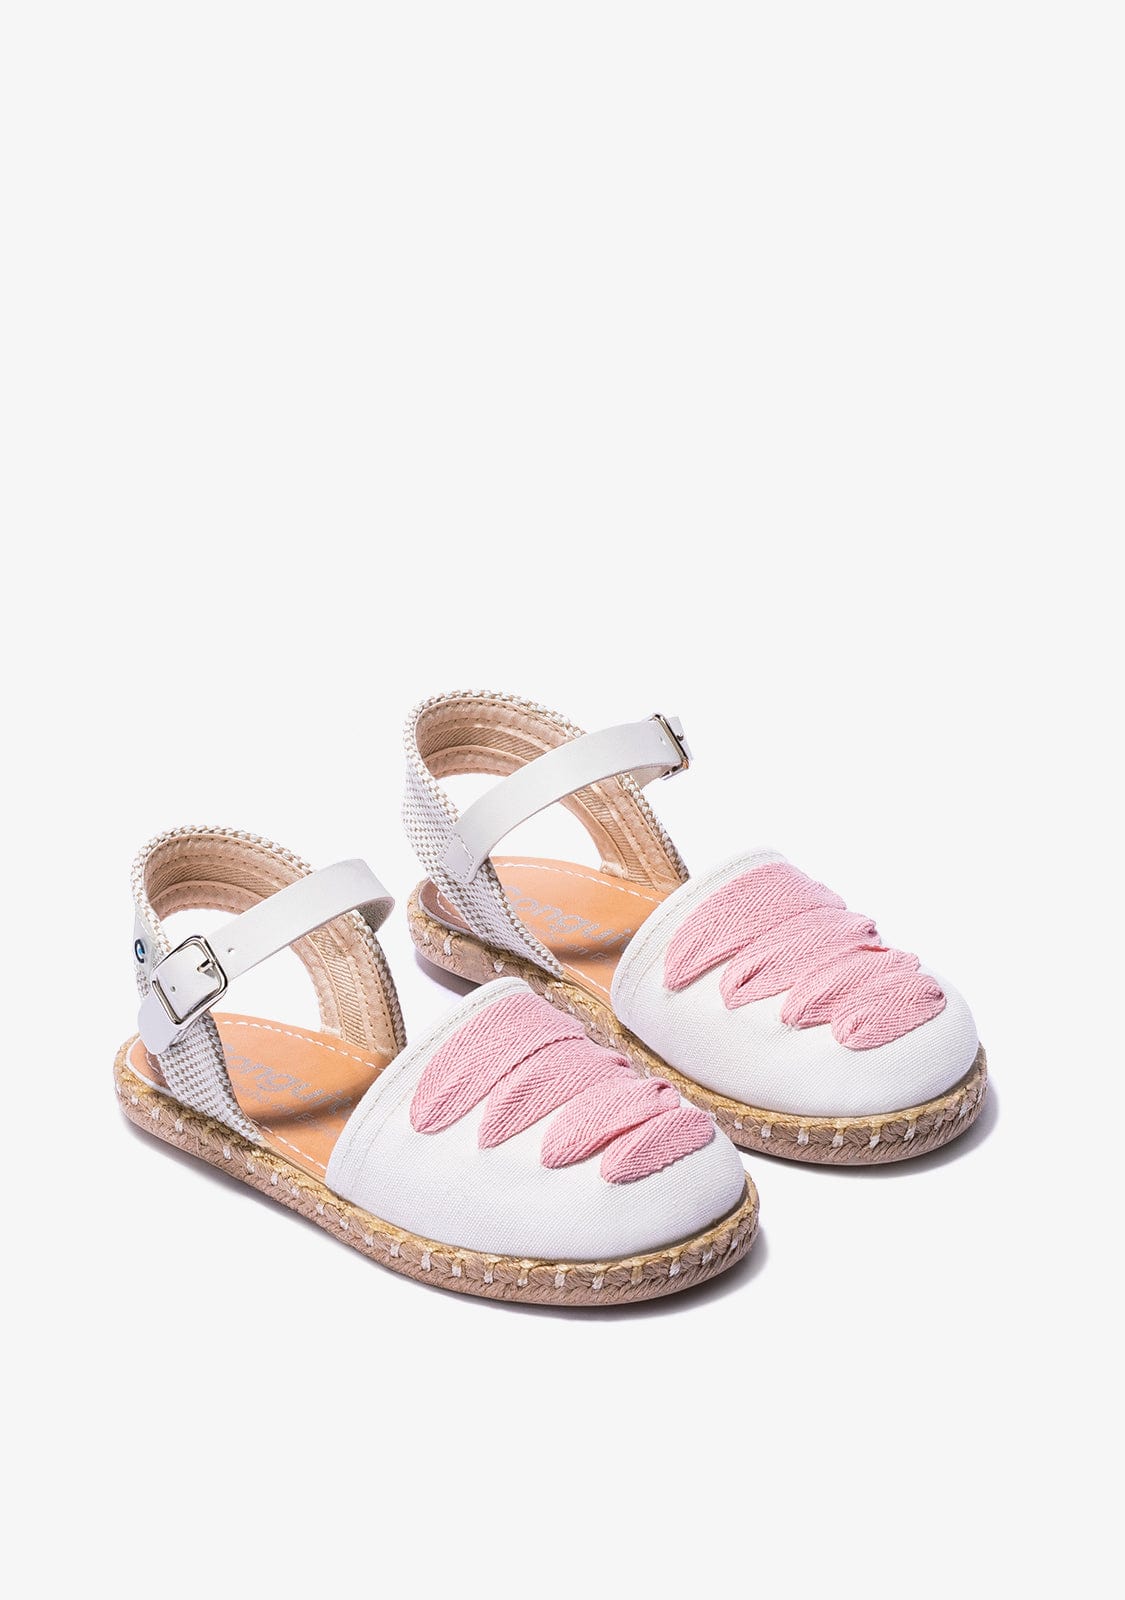 CONGUITOS Shoes Girl's White Pink Buckle Espadrilles